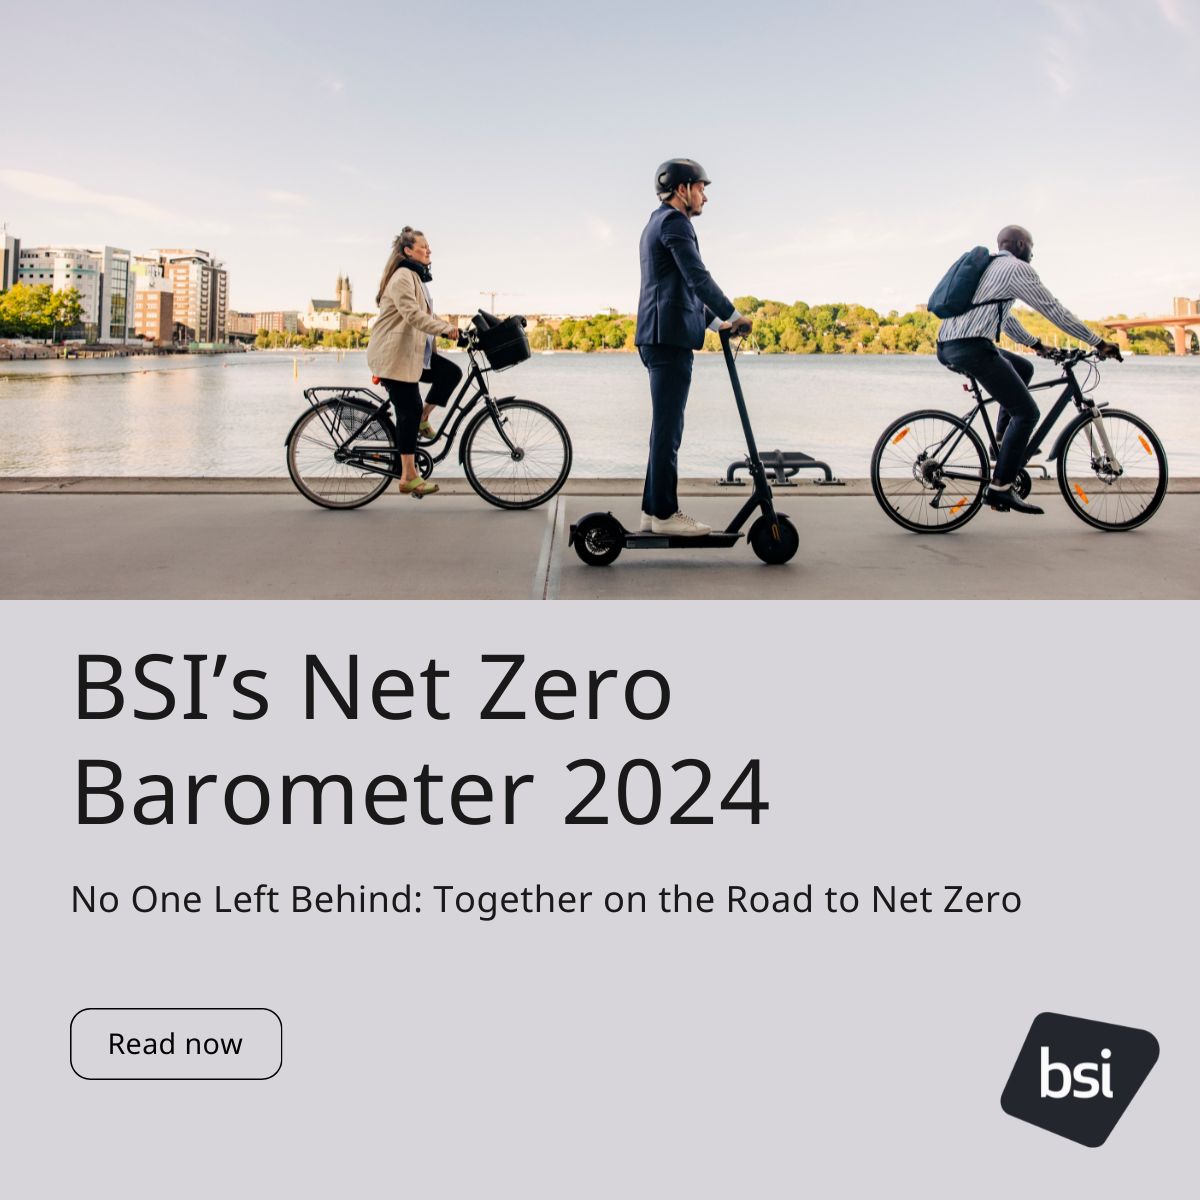 92% of #UKbusinesses urge the next government to back #netzero with stronger policies & financial incentives. Discover the latest insights in BSI's #NetZeroBarometer2024: bit.ly/4bIkJ3Q #ClimateAction #GreenEconomy #Sustainability